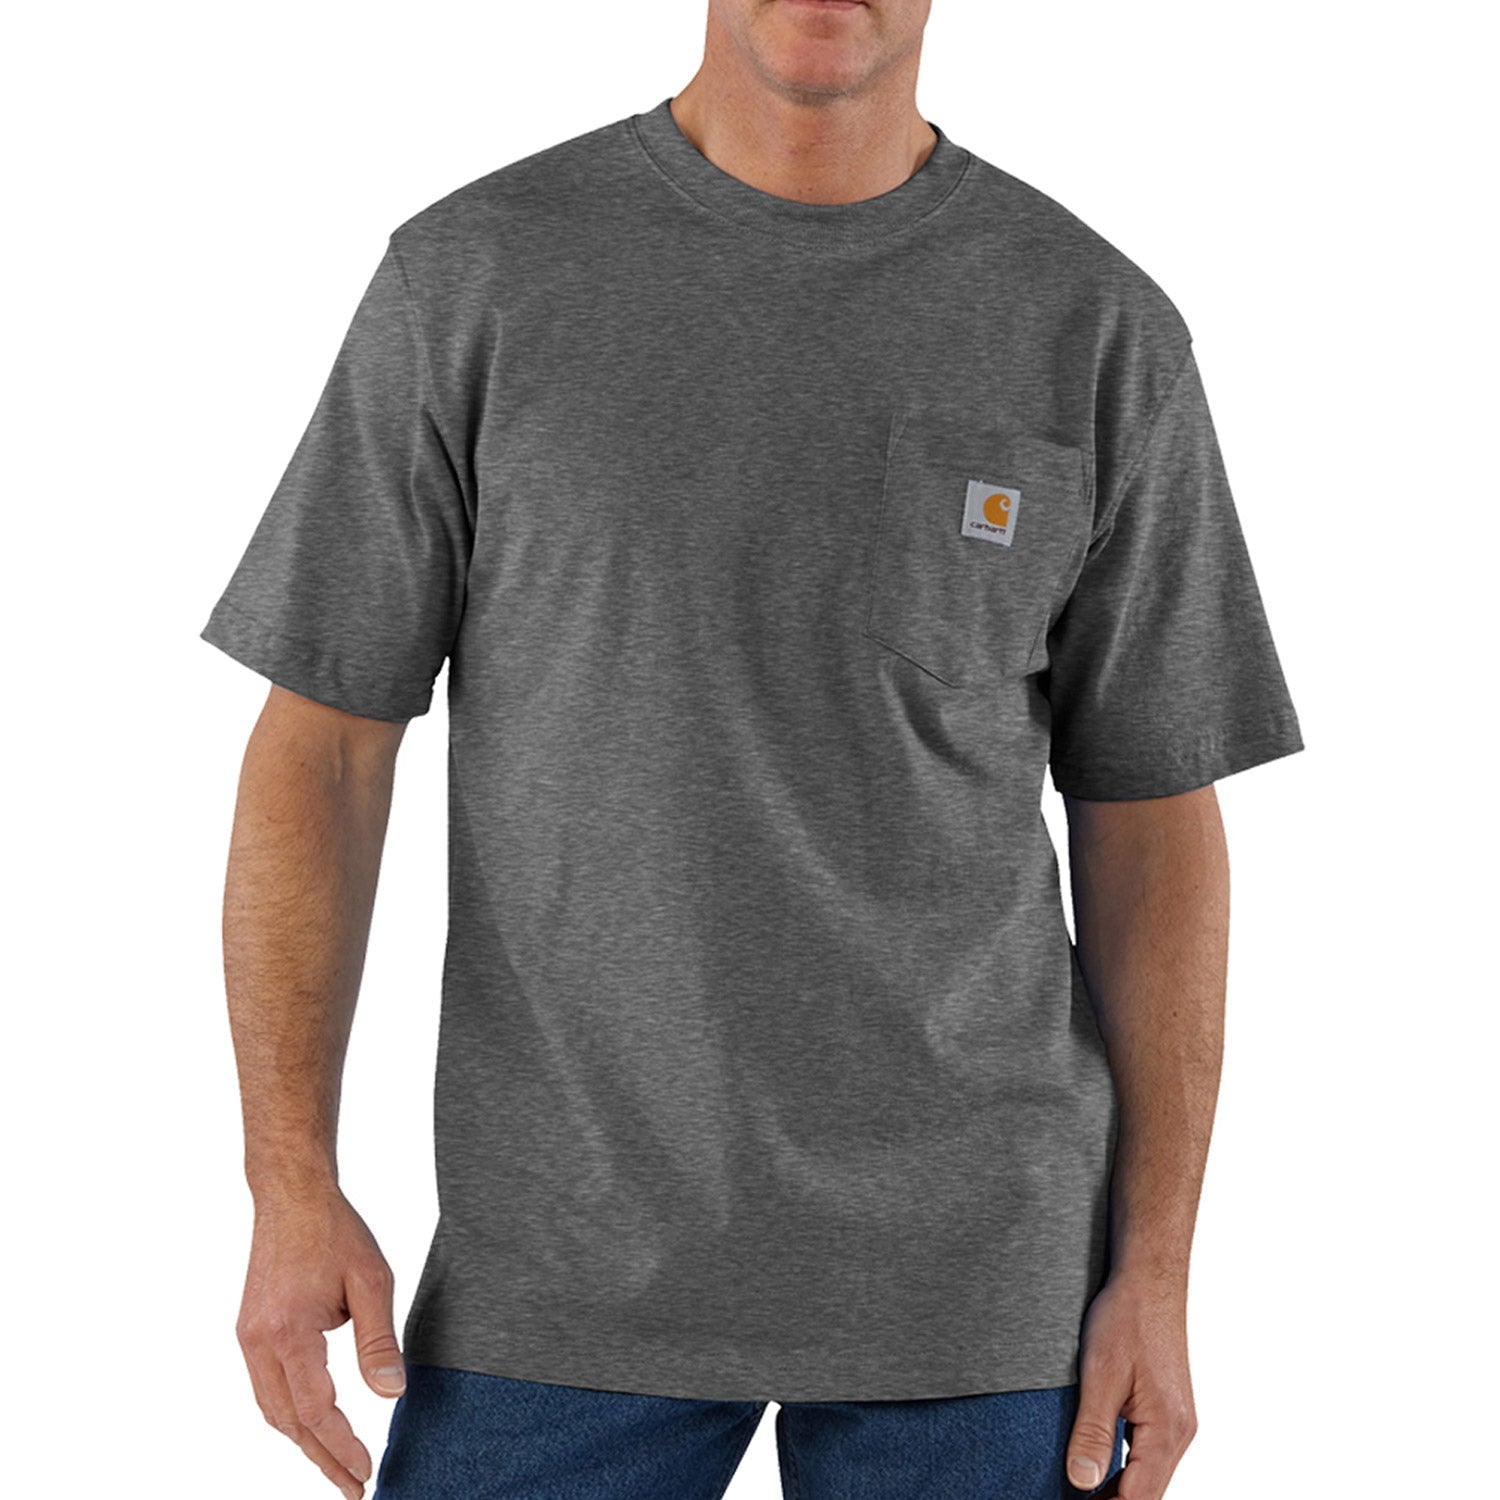 K87 - Loose Fit Heavyweight Pocket Tee, Carbon Heather